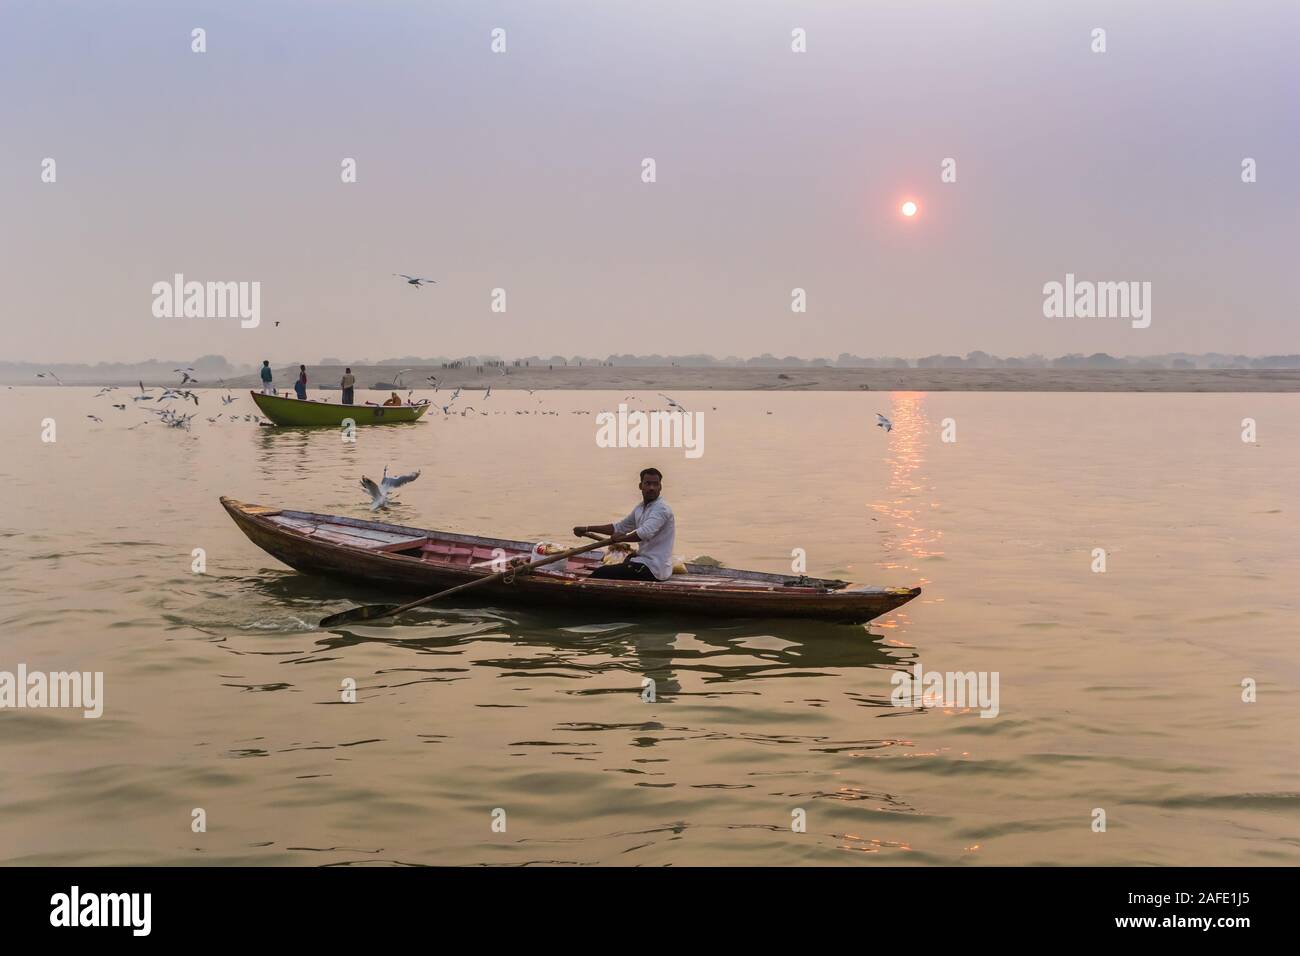 Young man in a row boat on the Ganges river in Varanasi, India Stock Photo